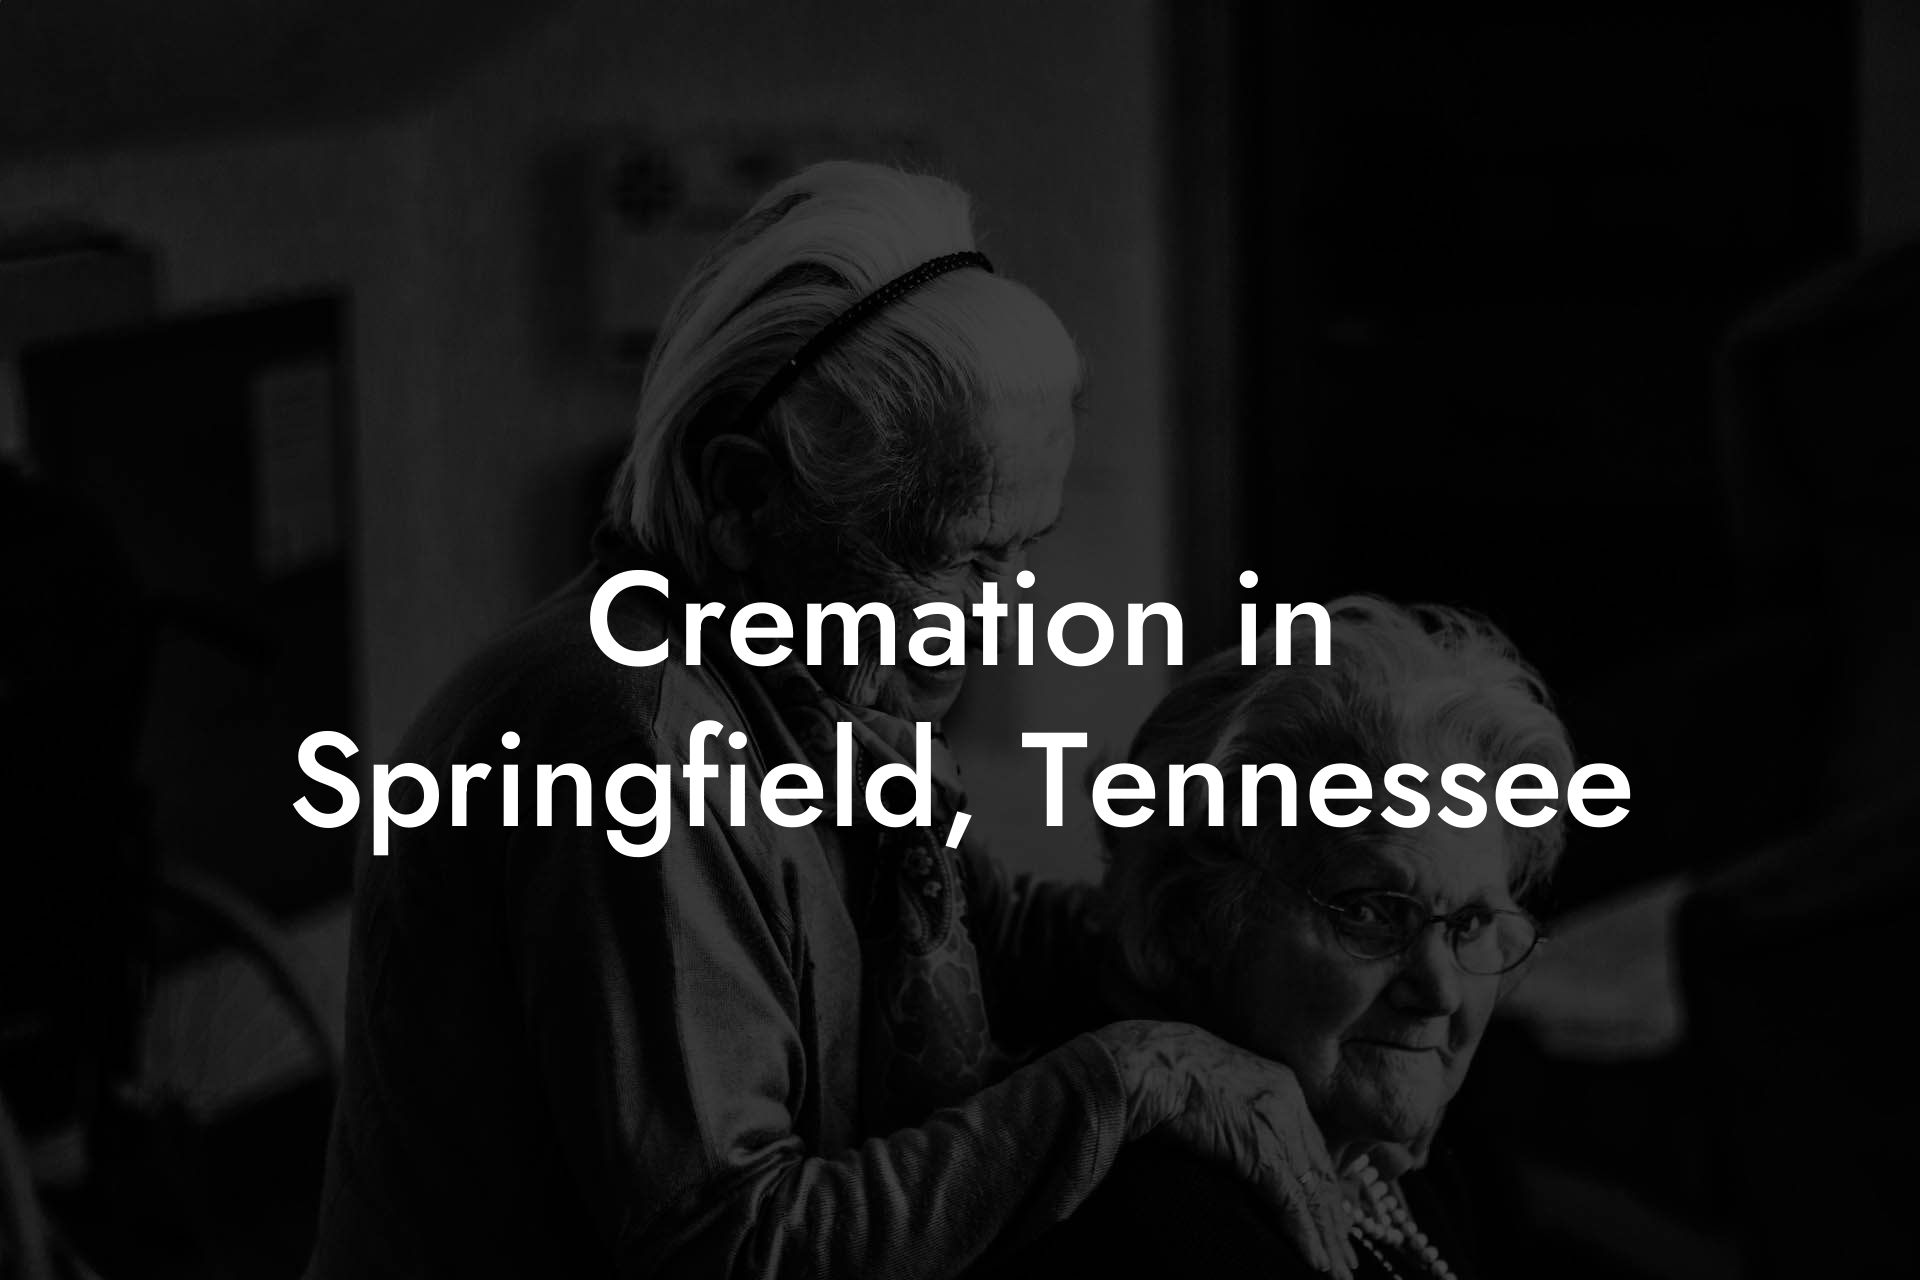 Cremation in Springfield, Tennessee